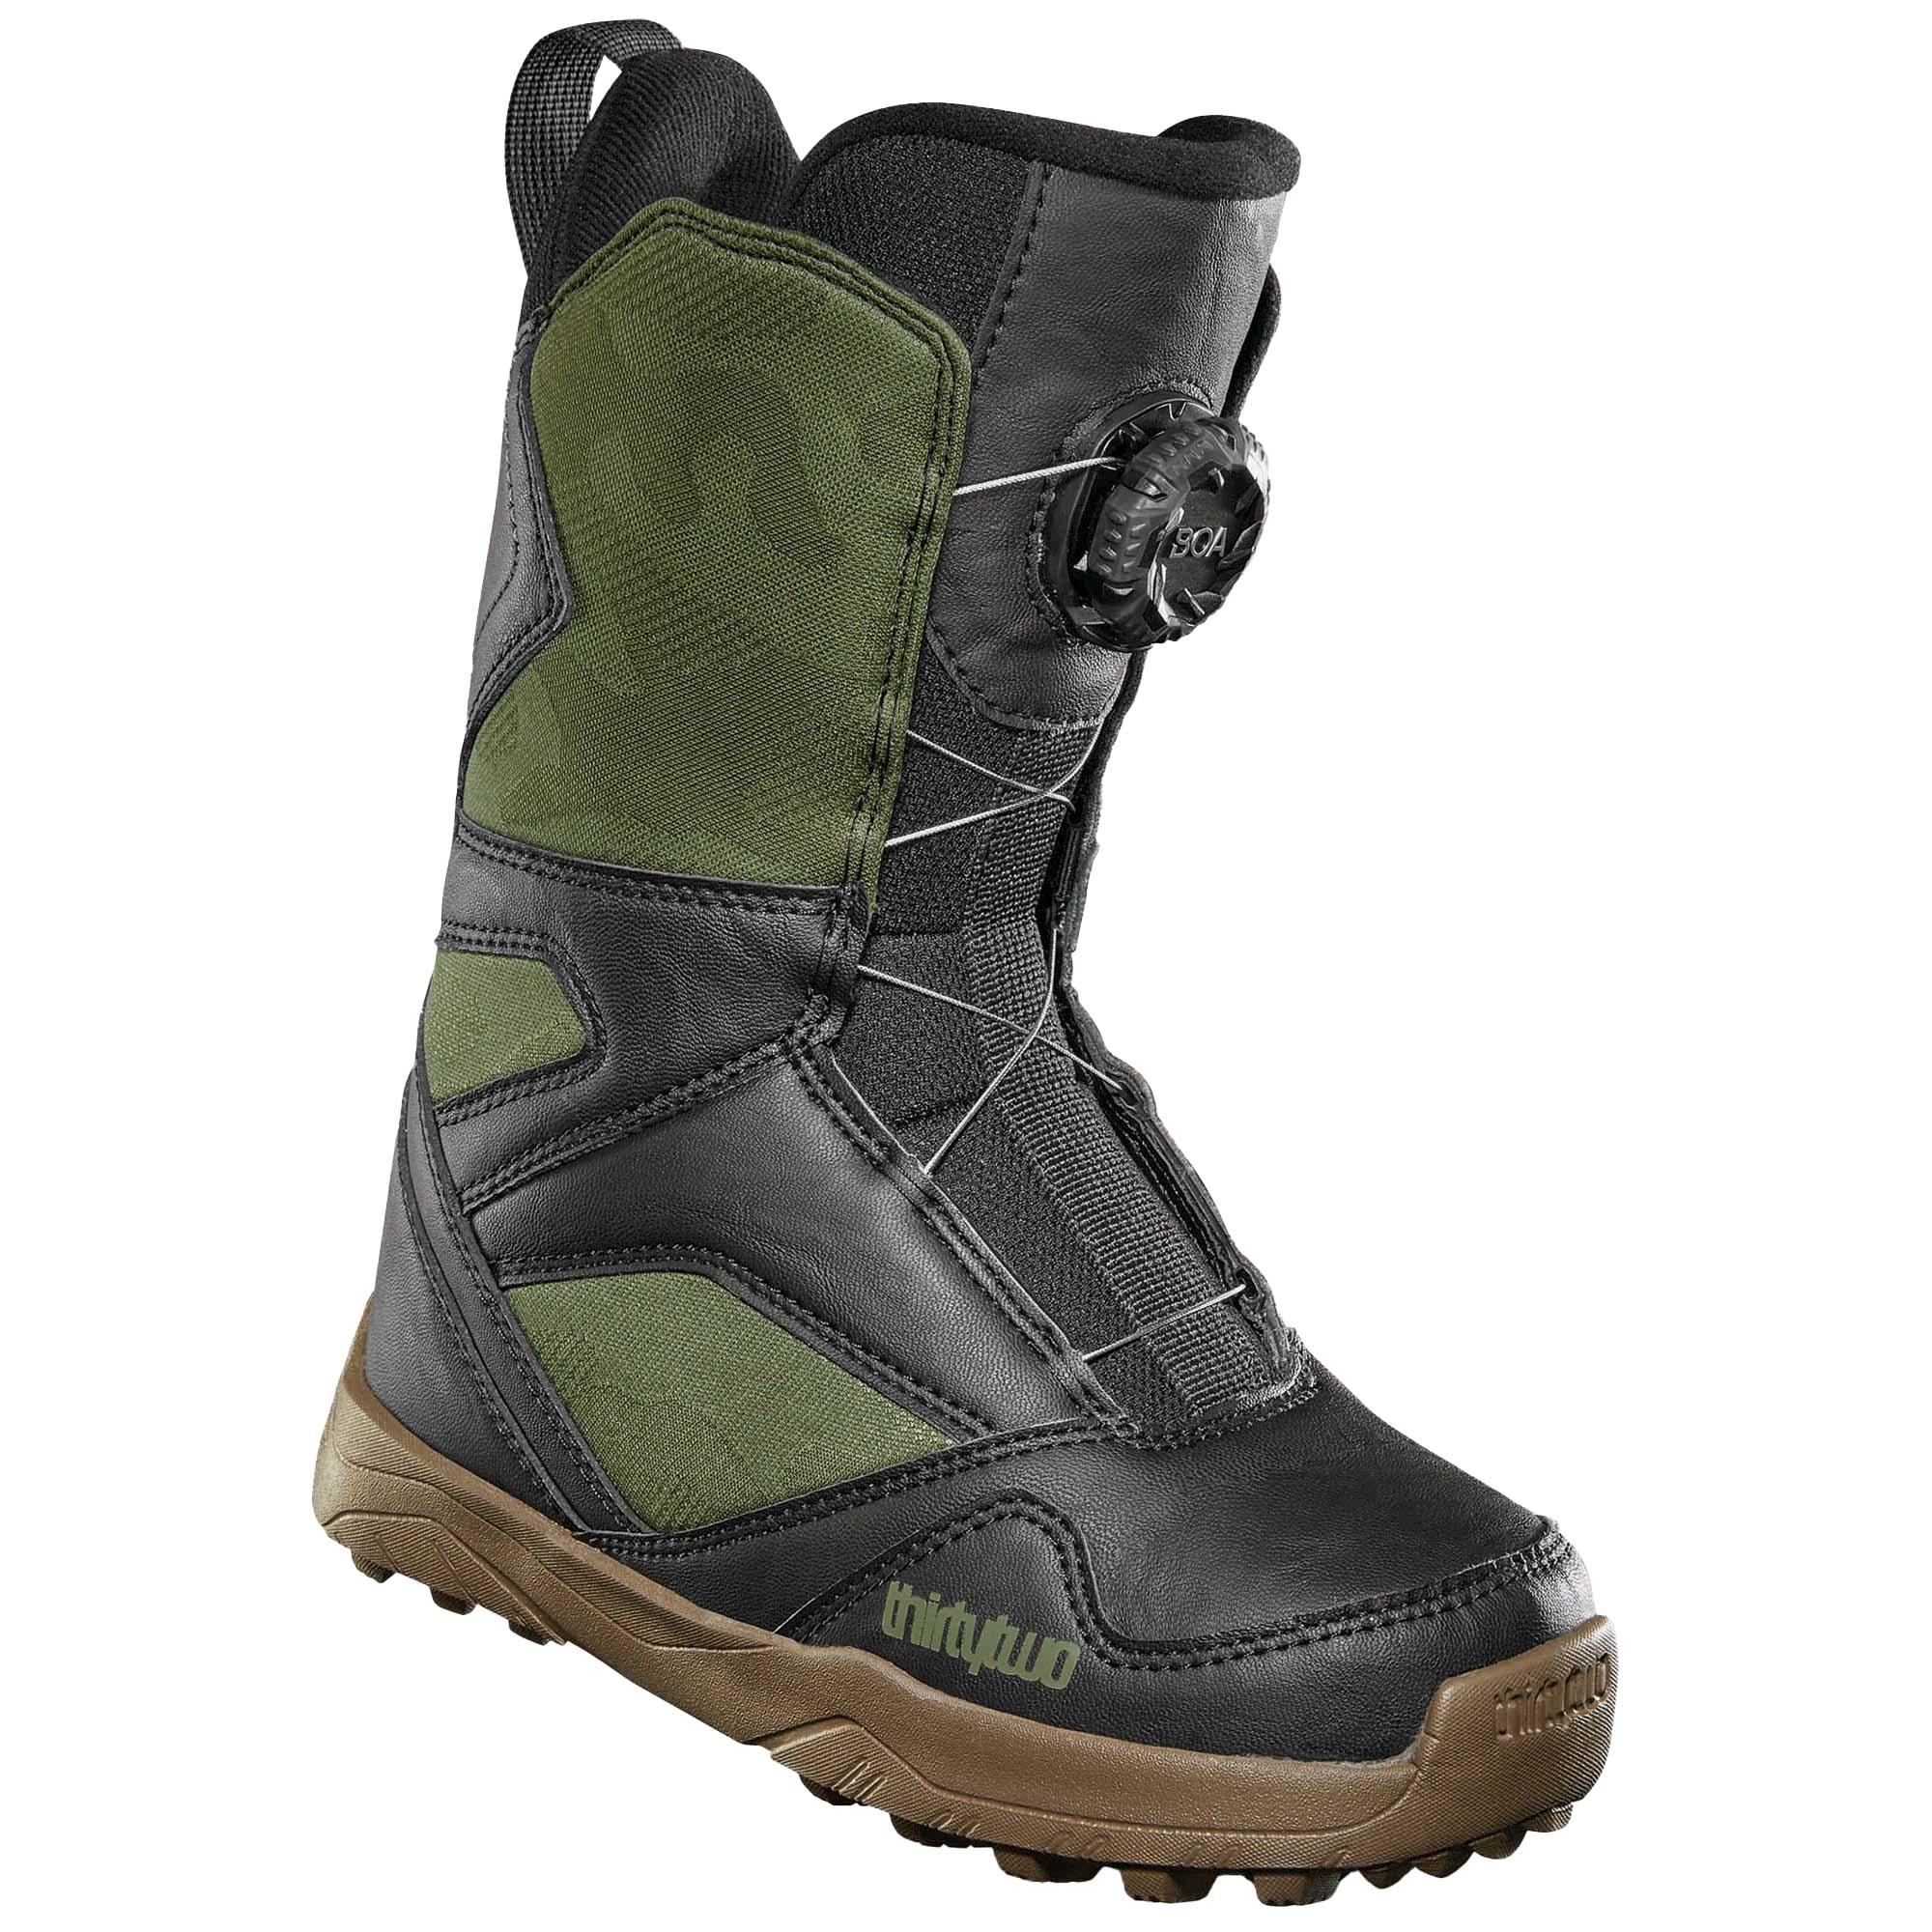 thirtytwo Kids BOA Youth Snowboard Boots